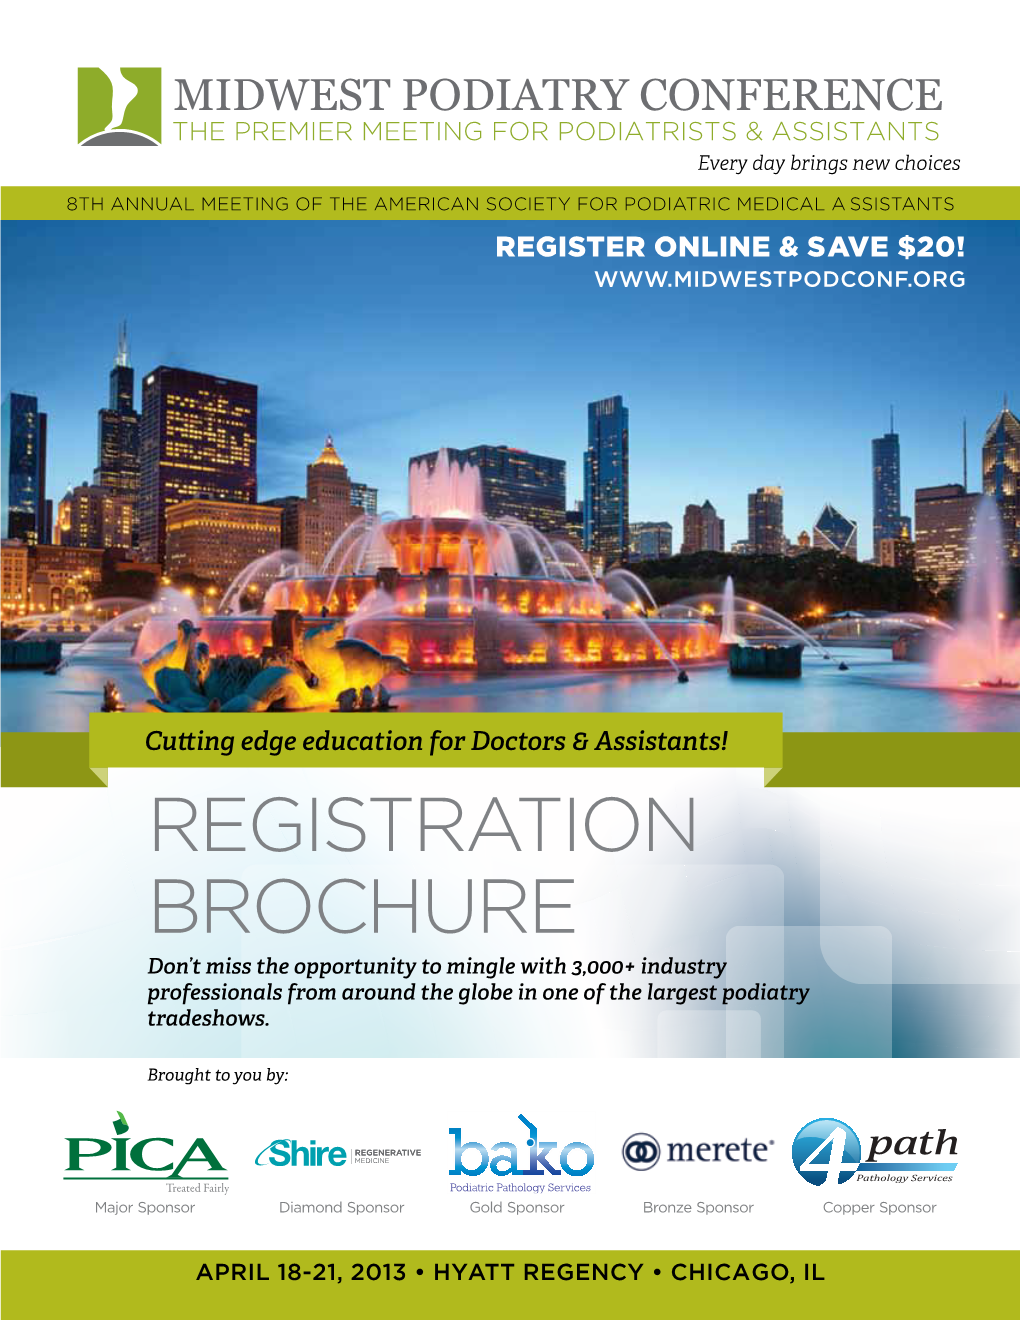 Registration Brochure Don’T Miss the Opportunity to Mingle with 3,000+ Industry Professionals from Around the Globe in One of the Largest Podiatry Tradeshows